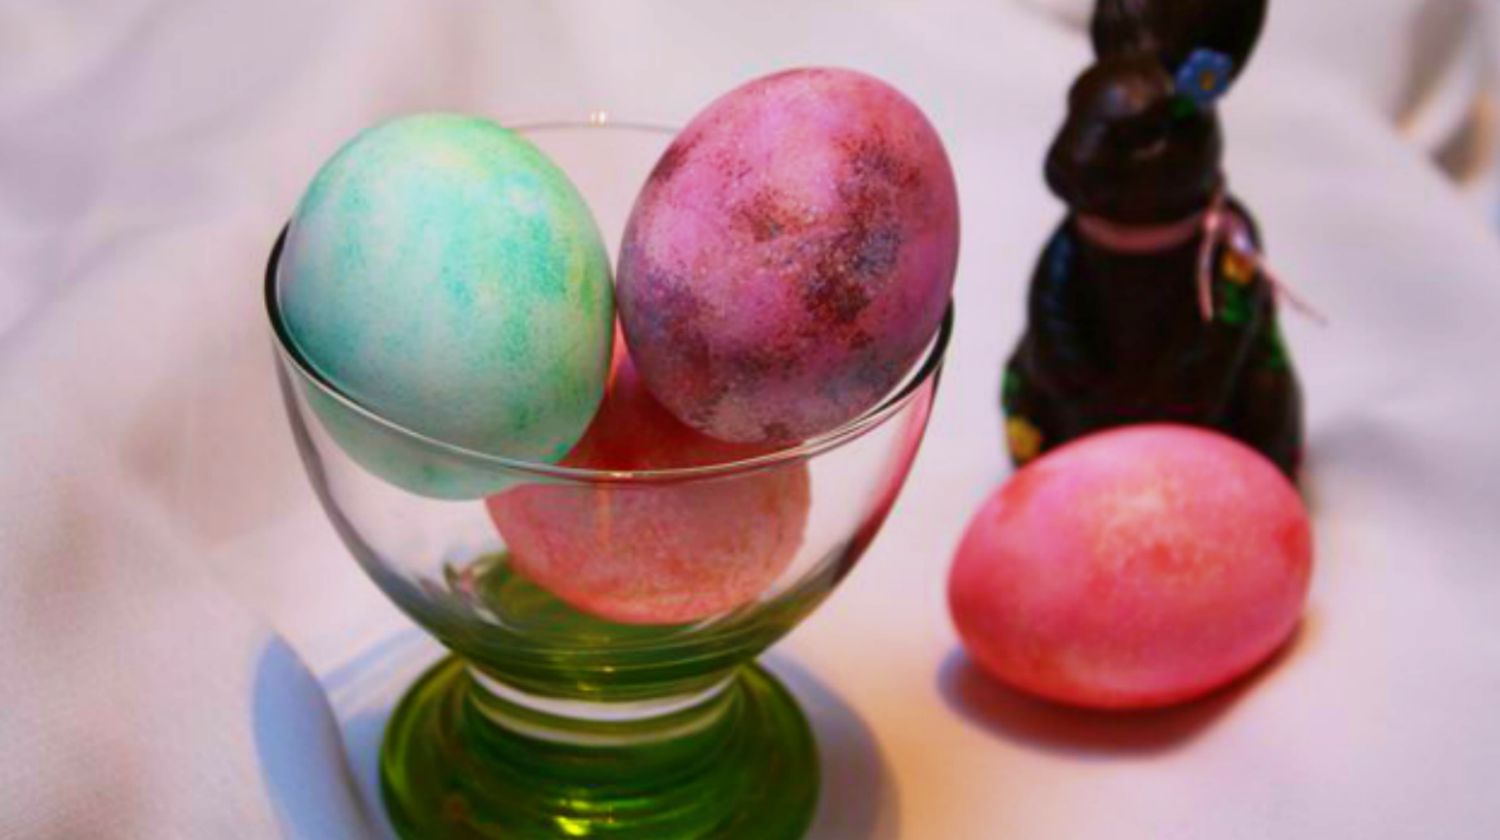 Feature | Unique hand painted Easter eggs | DIY Easter Egg Projects with Shaving Cream (Yup!)